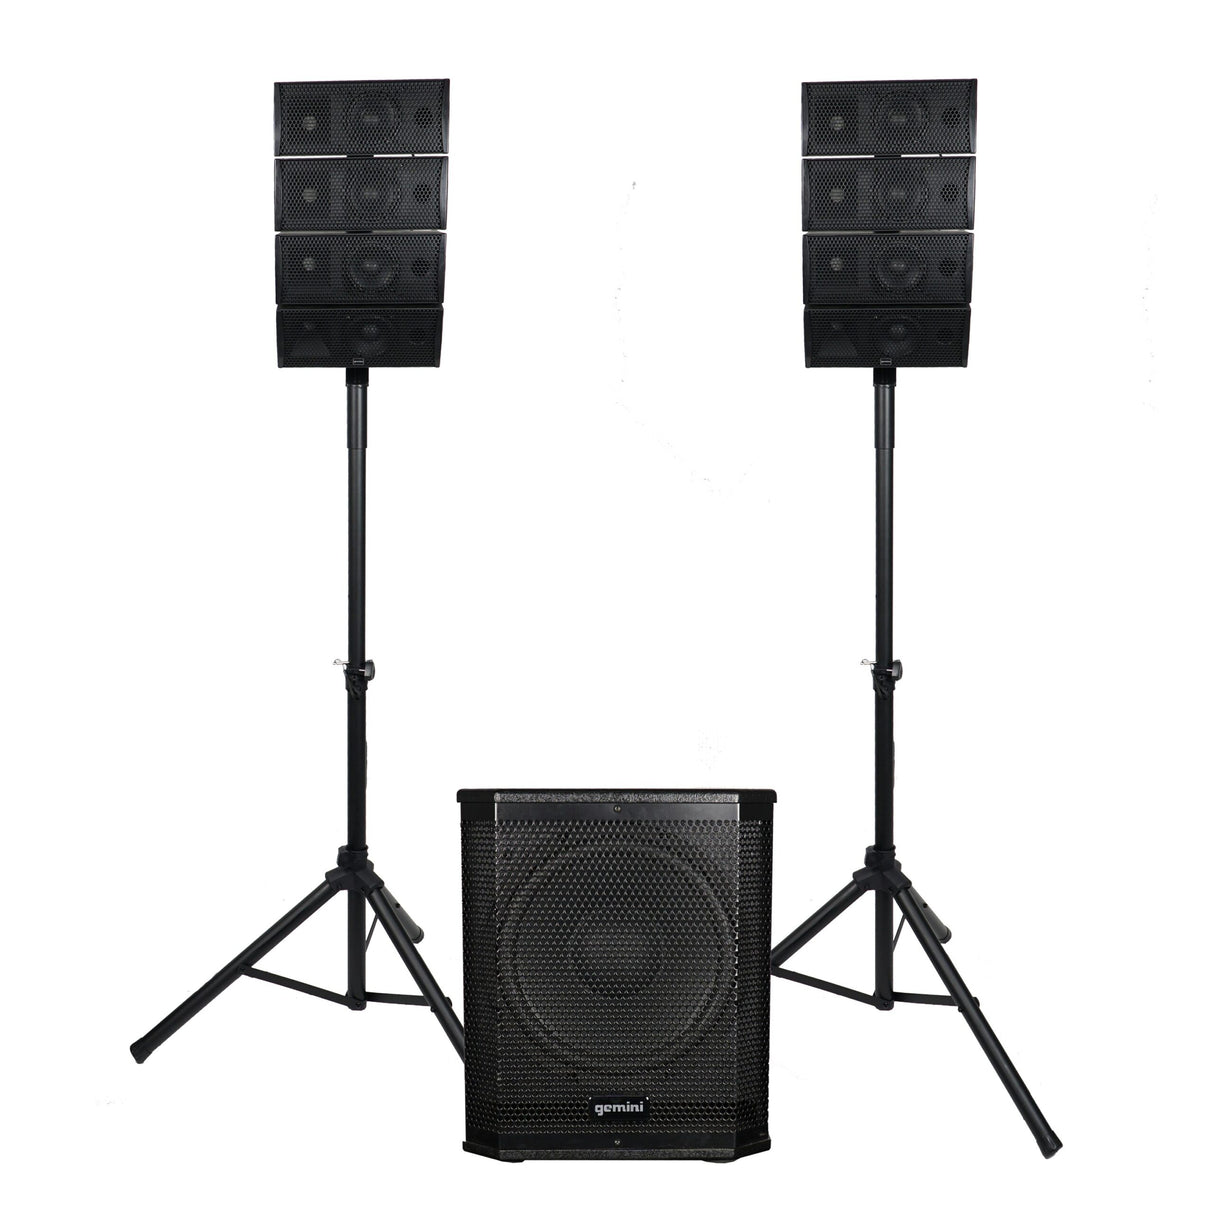 Gemini LRX-448 Portable Line Array Speaker with 12-Inch Subwoofer